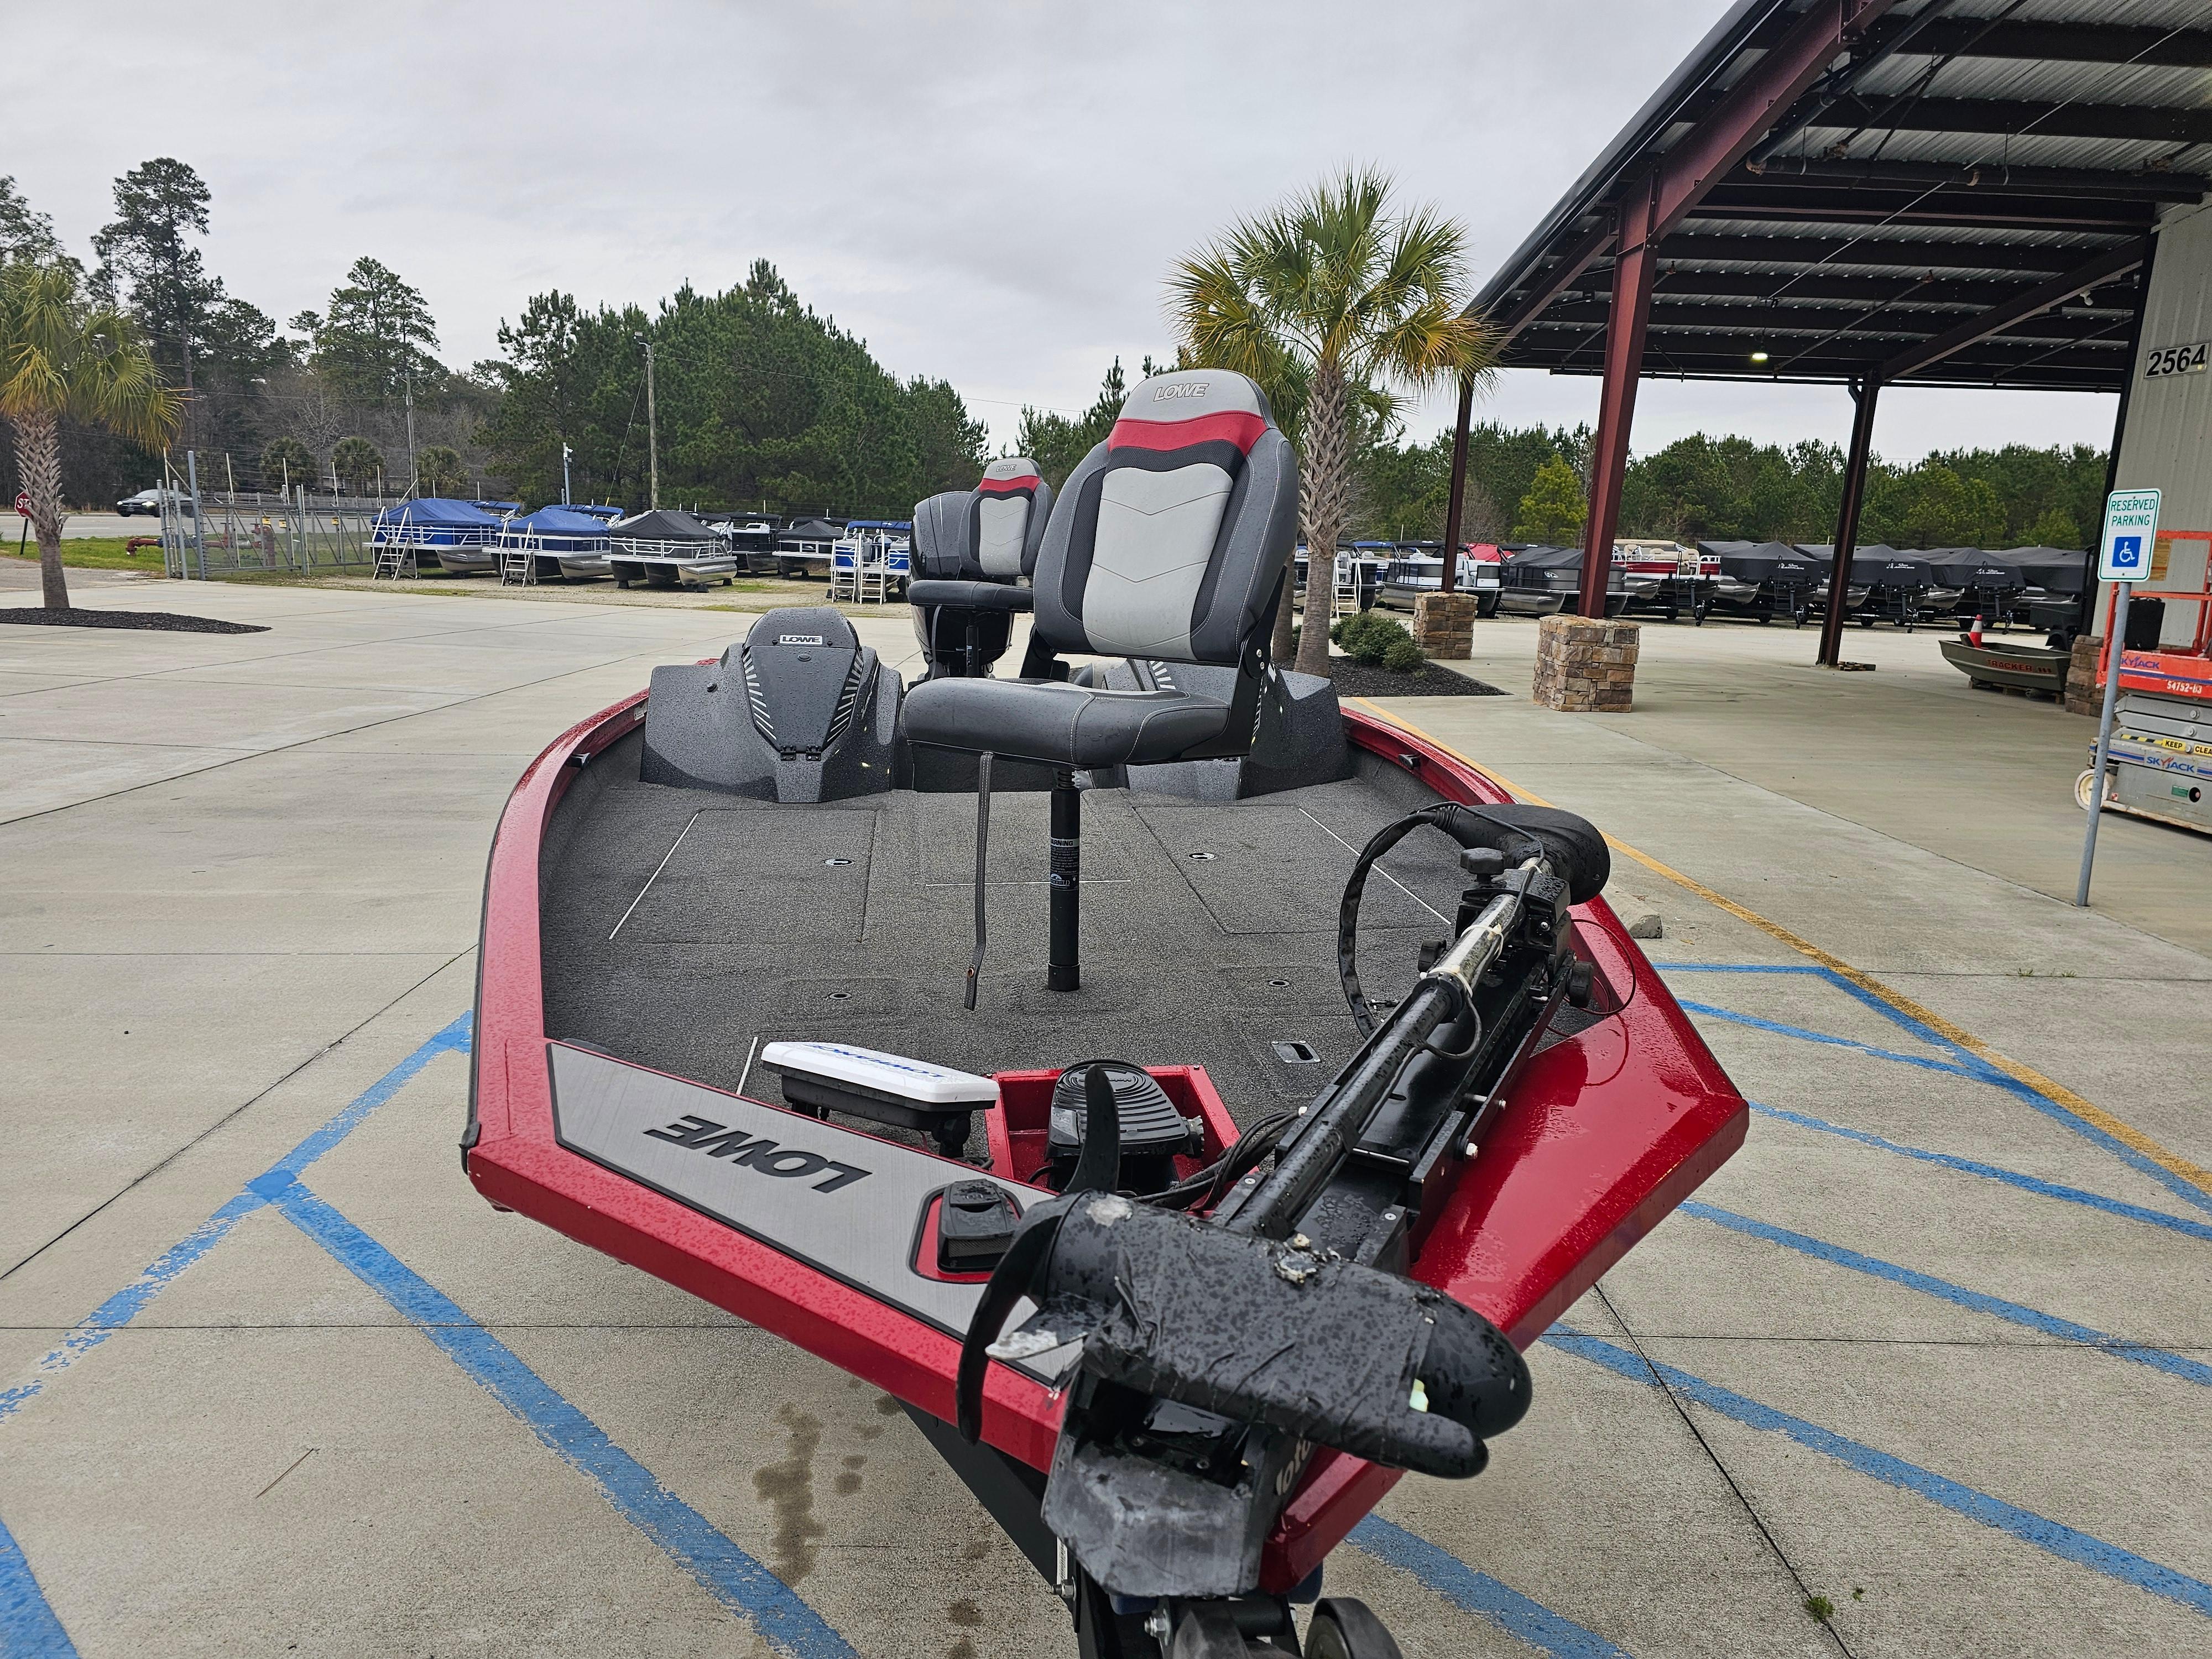 2018 Lowe Boats Stinger 198 Dual Console